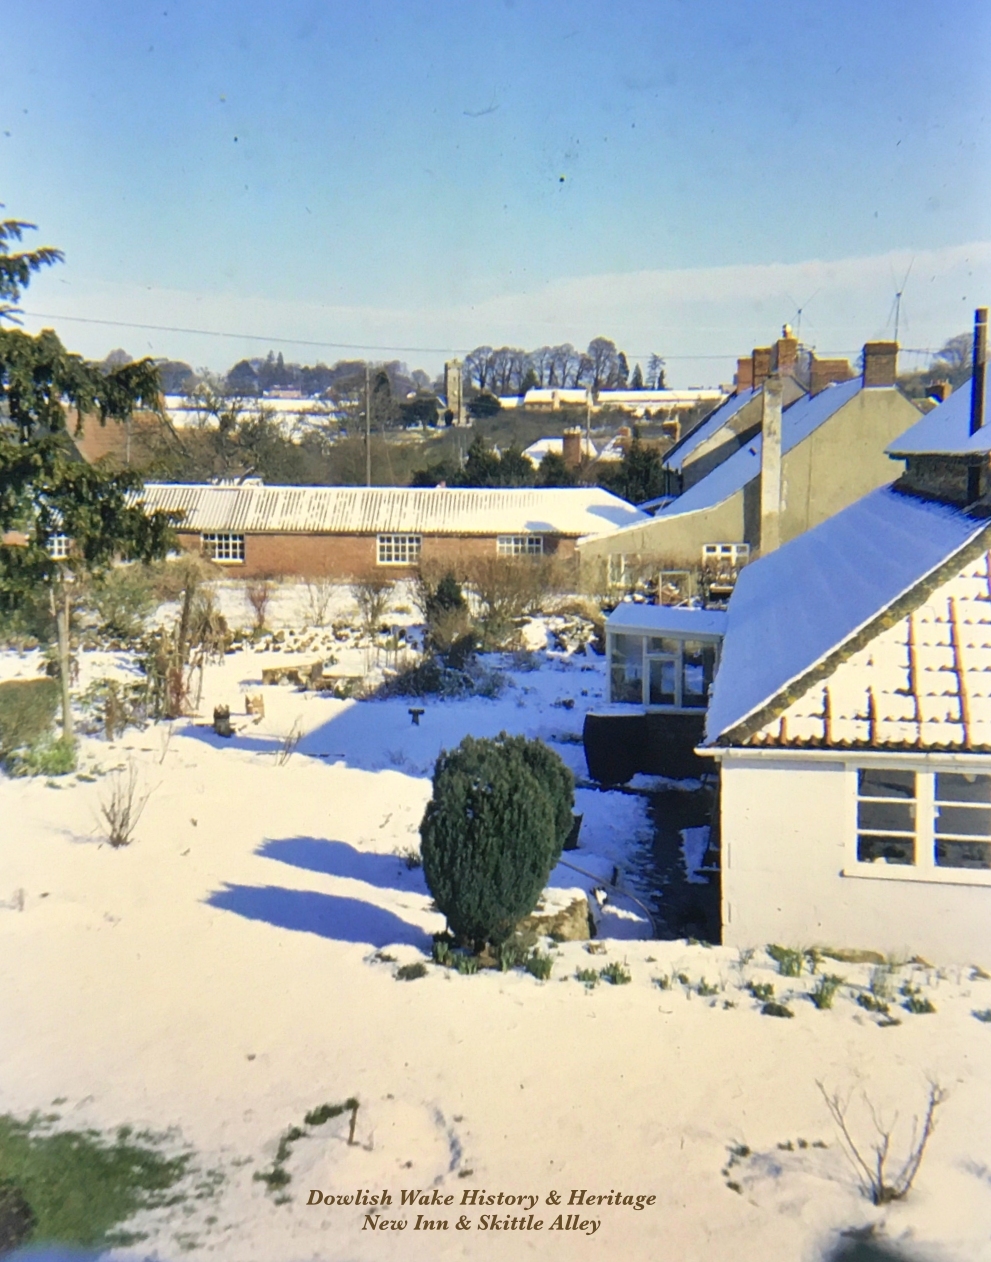 Rear of New Inn and Skittle Alley, Rose Cottage in foreground.